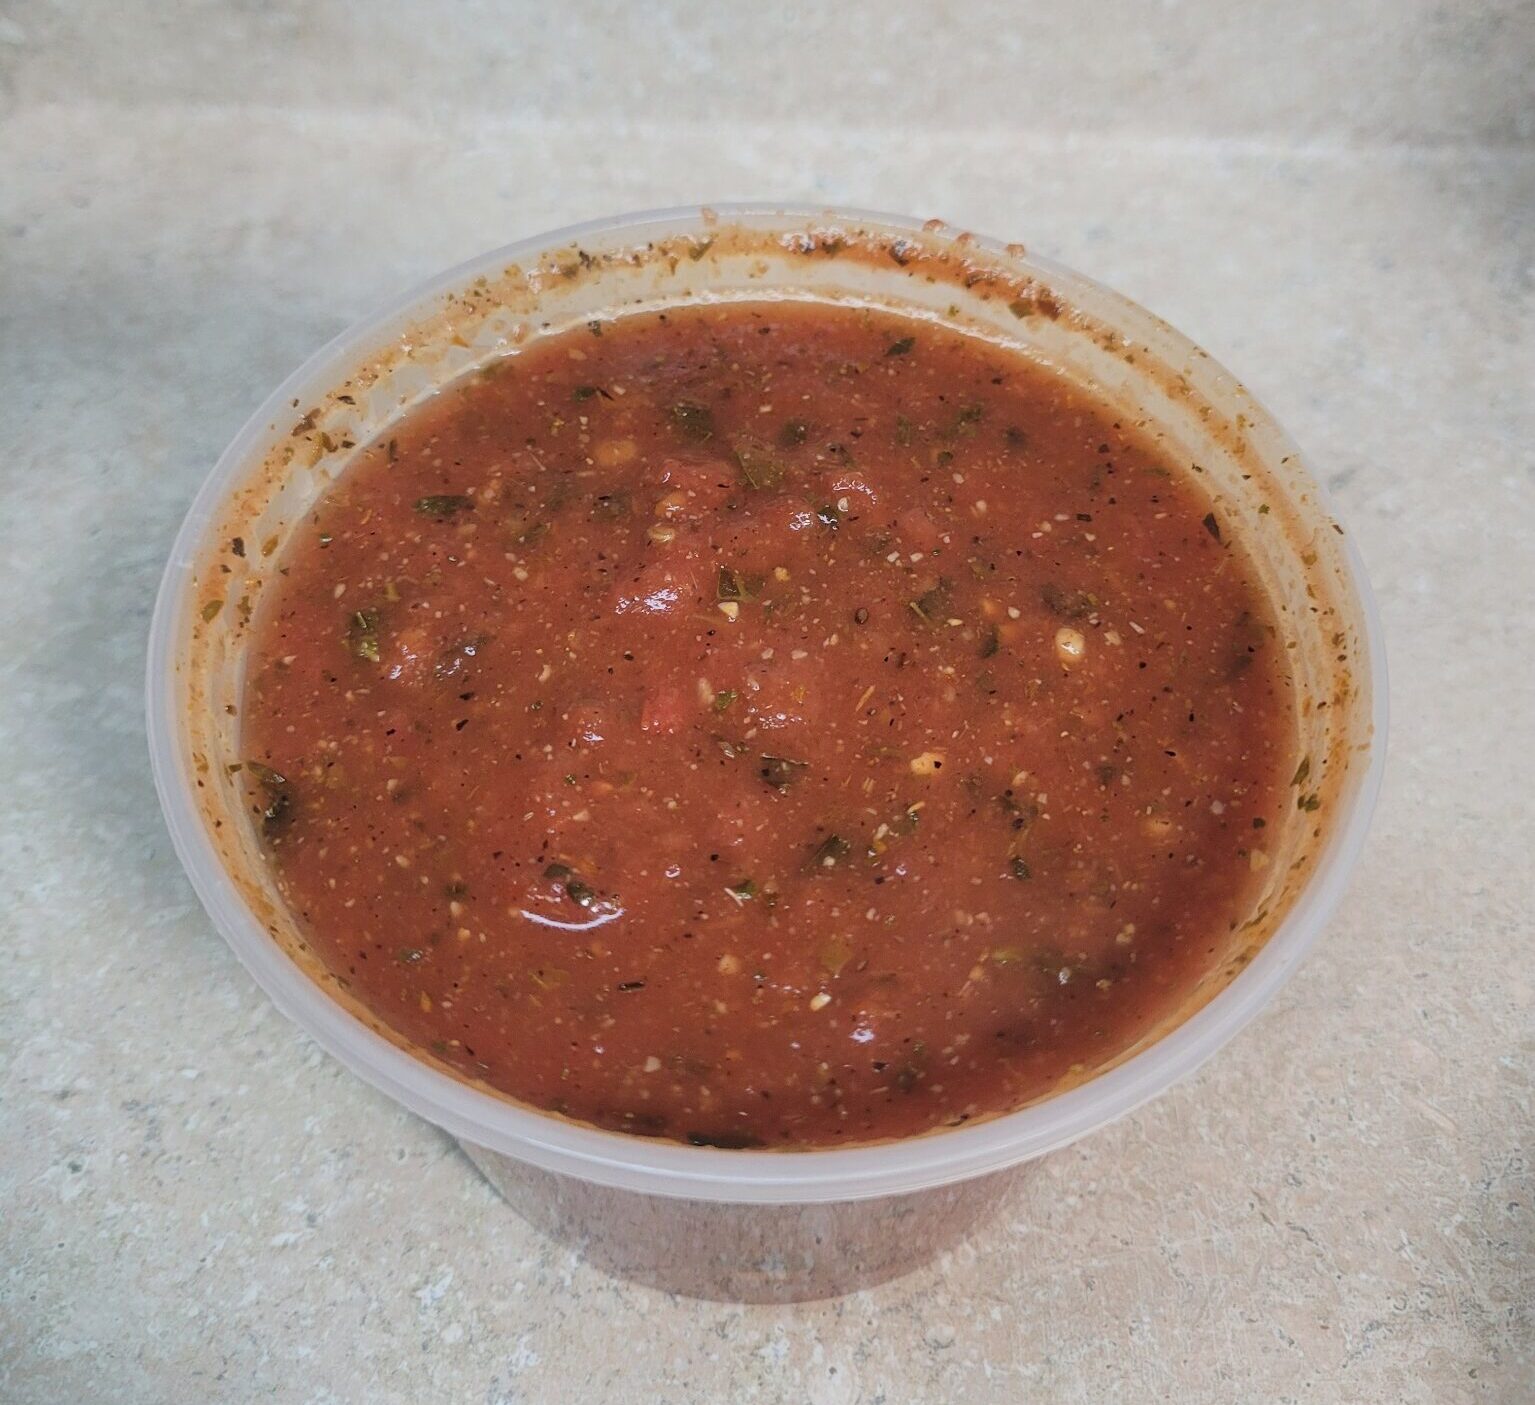 Flavorful “Homemade” Marinara Sauce with Canned No Salt Tomatoes